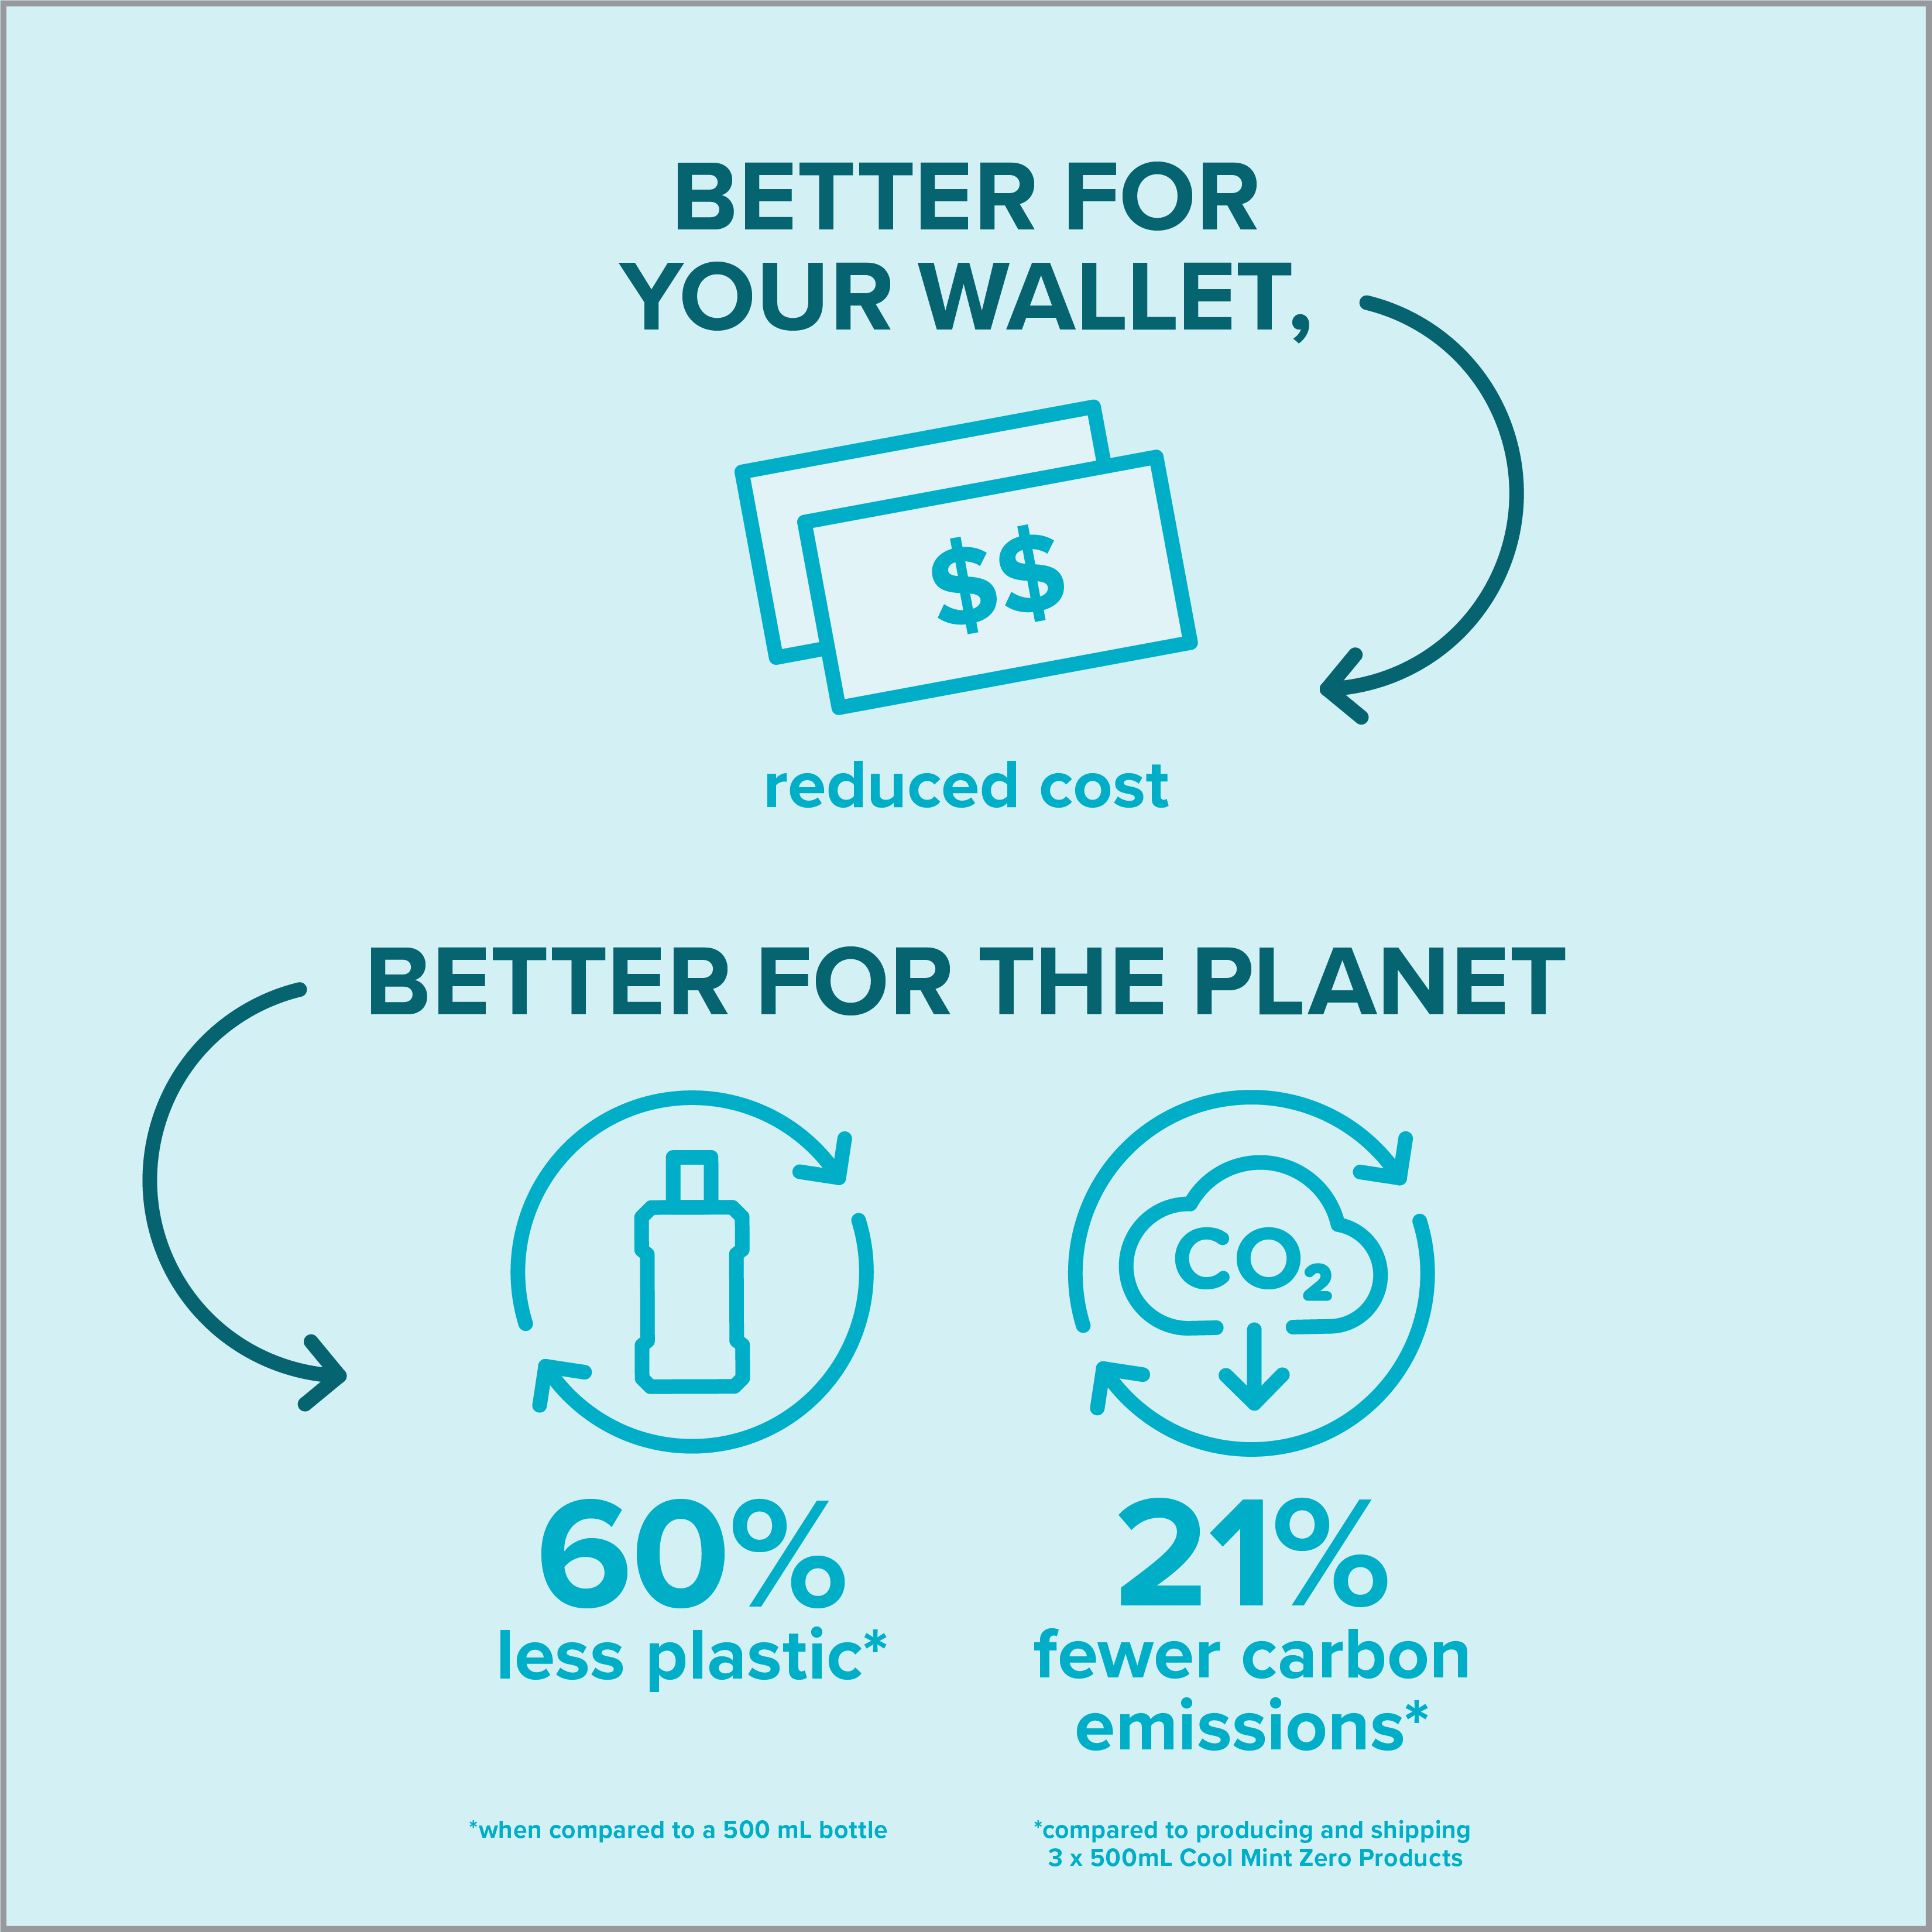 Listerine Concentrate Refills are better for your wallet and better for the planet